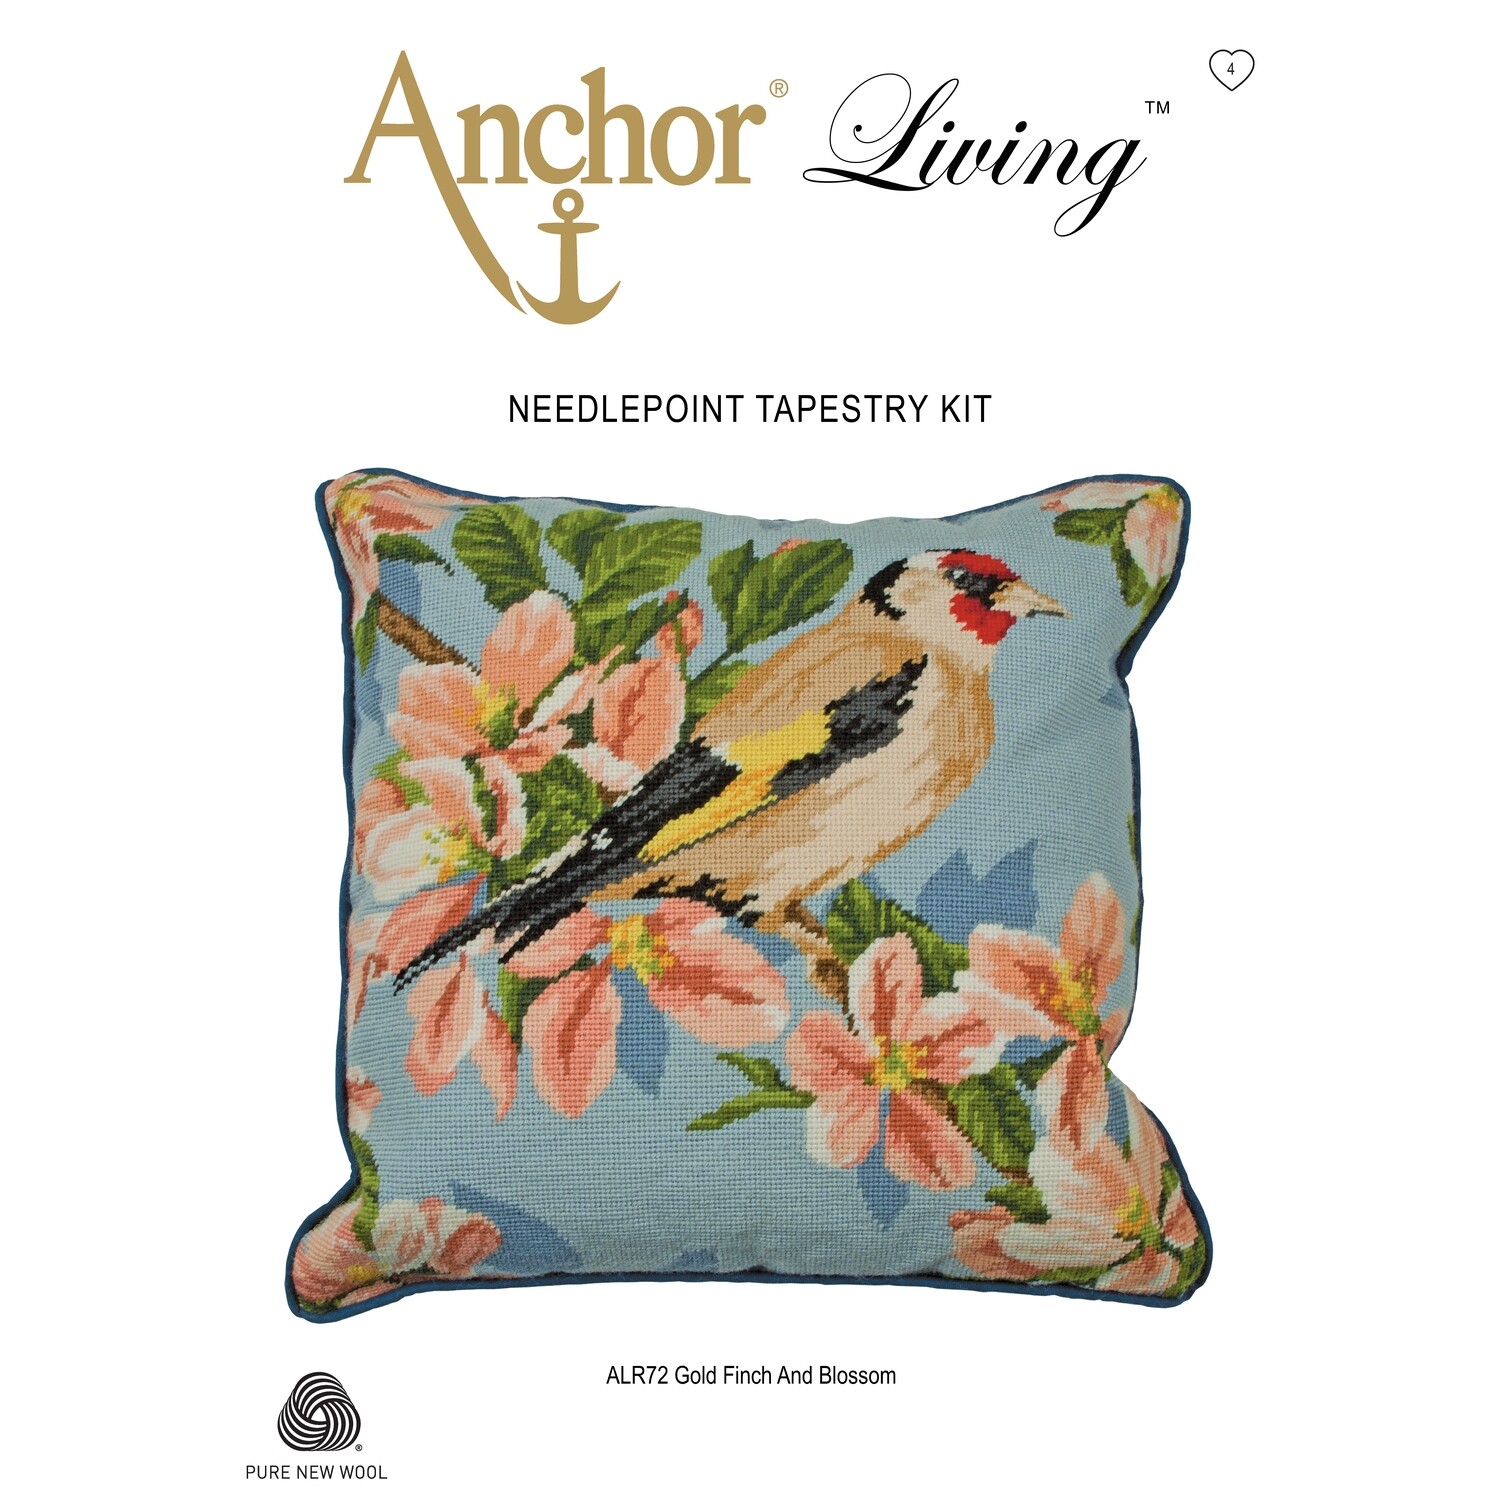 Anchor Living Tapestry Kit - Tapestry Goldfinch & Blossom Cushion